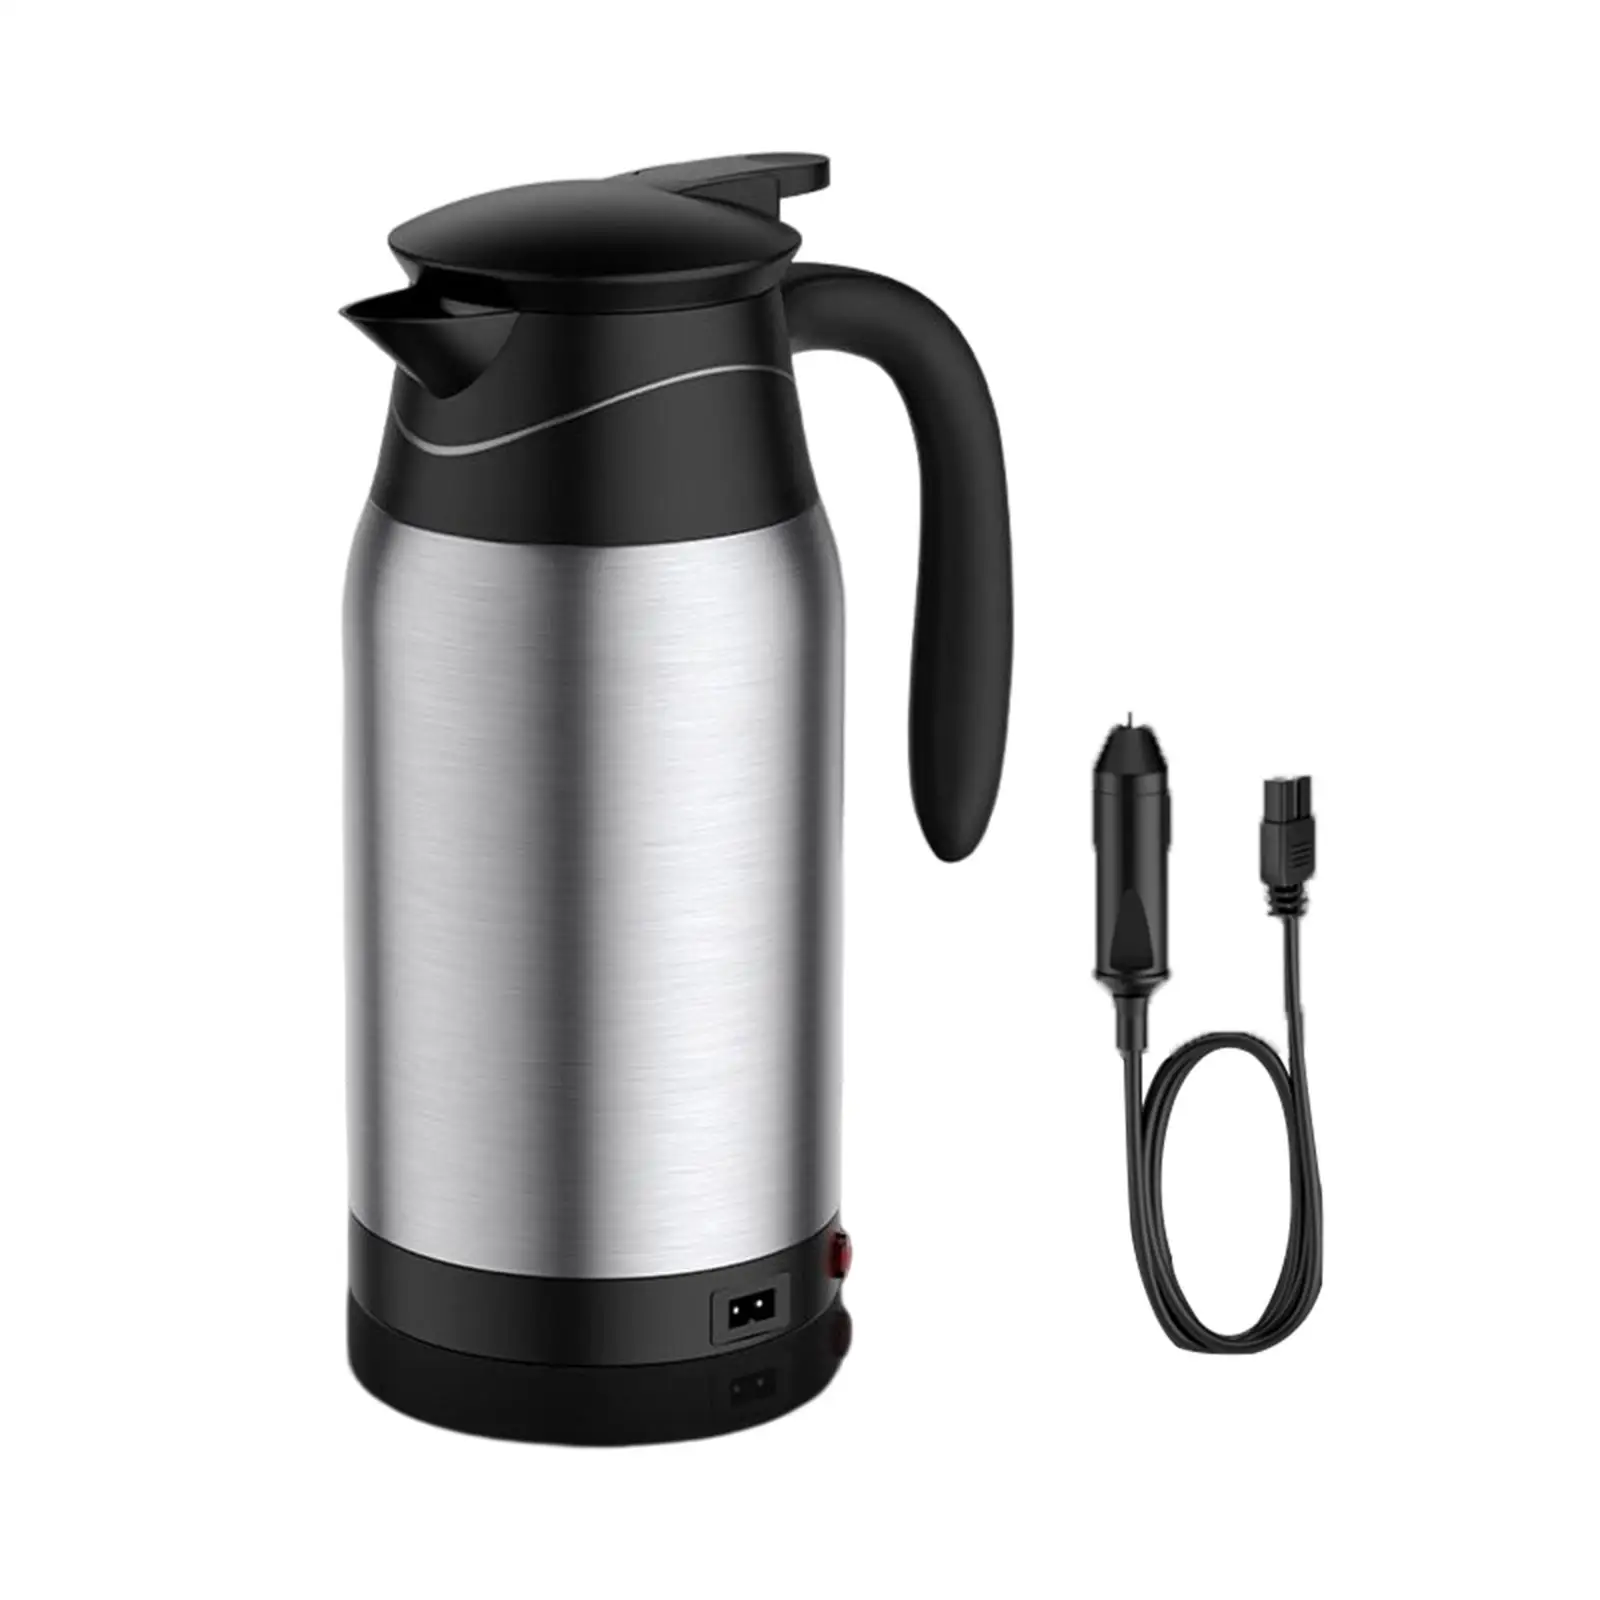 

24V Car Heating Cup Easily Washing Car Electric Kettle Drinking Cup Water Boiler for Self Driving Tour Tea coffee